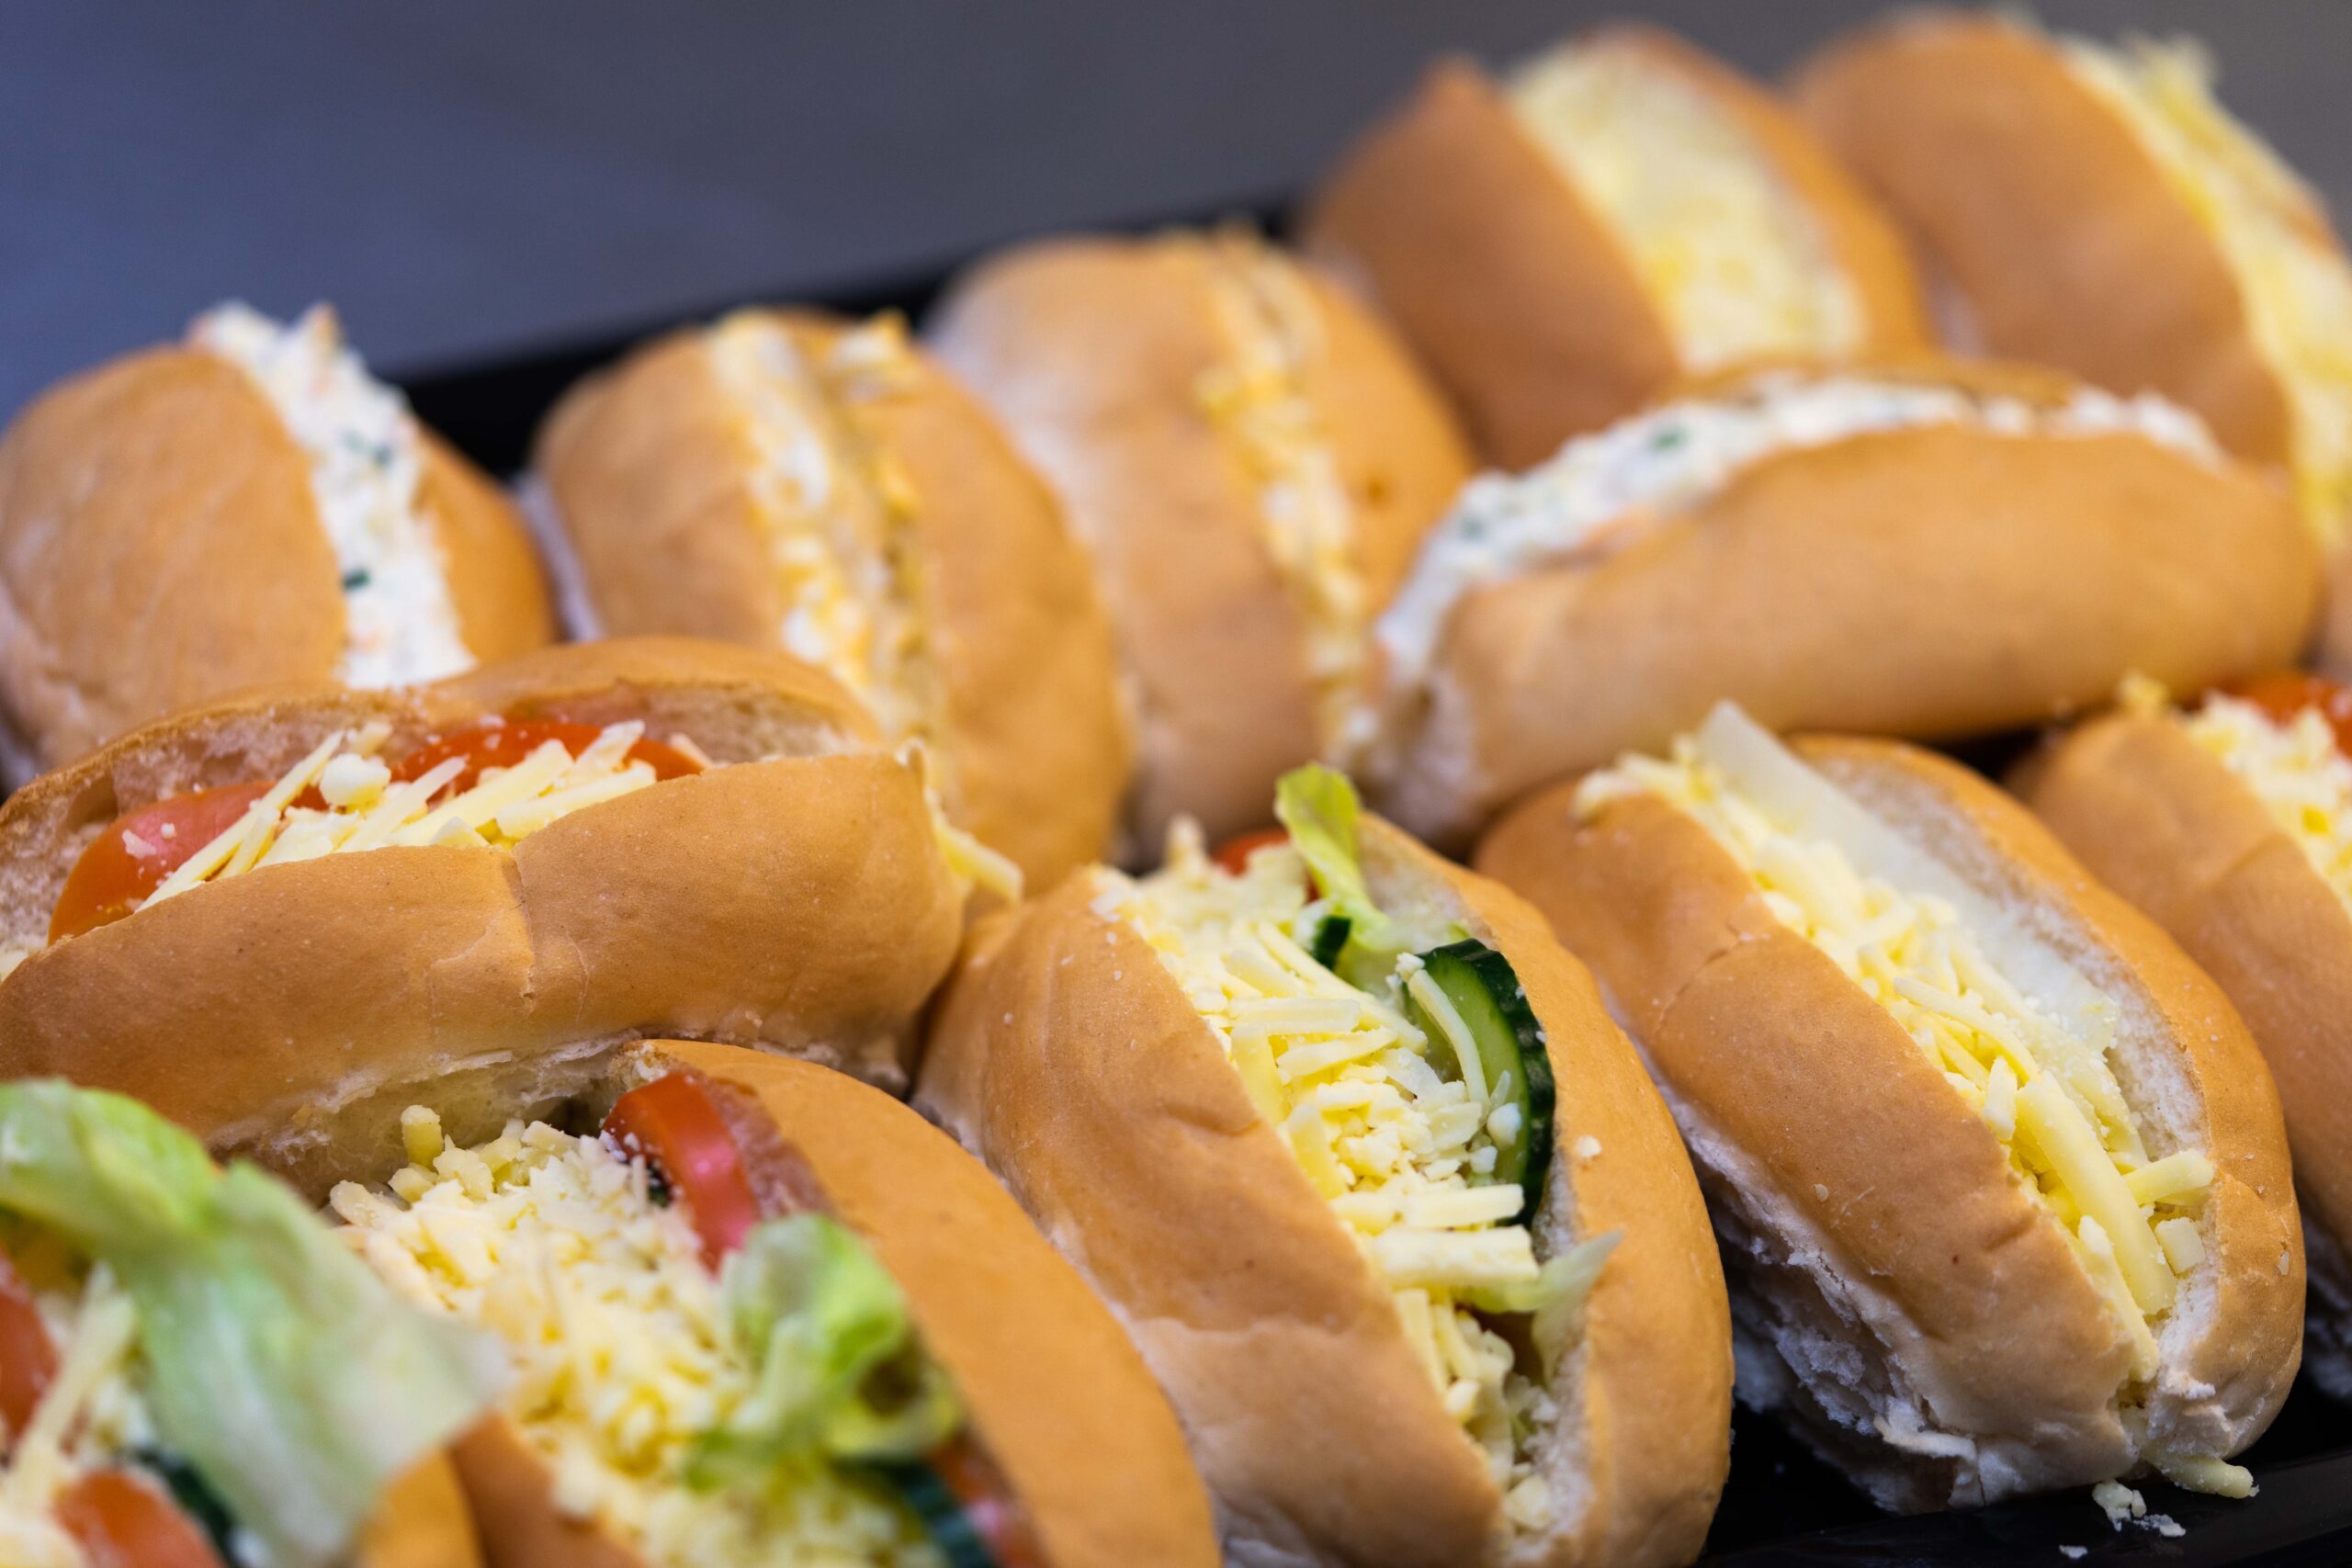 Selection of filled rolls